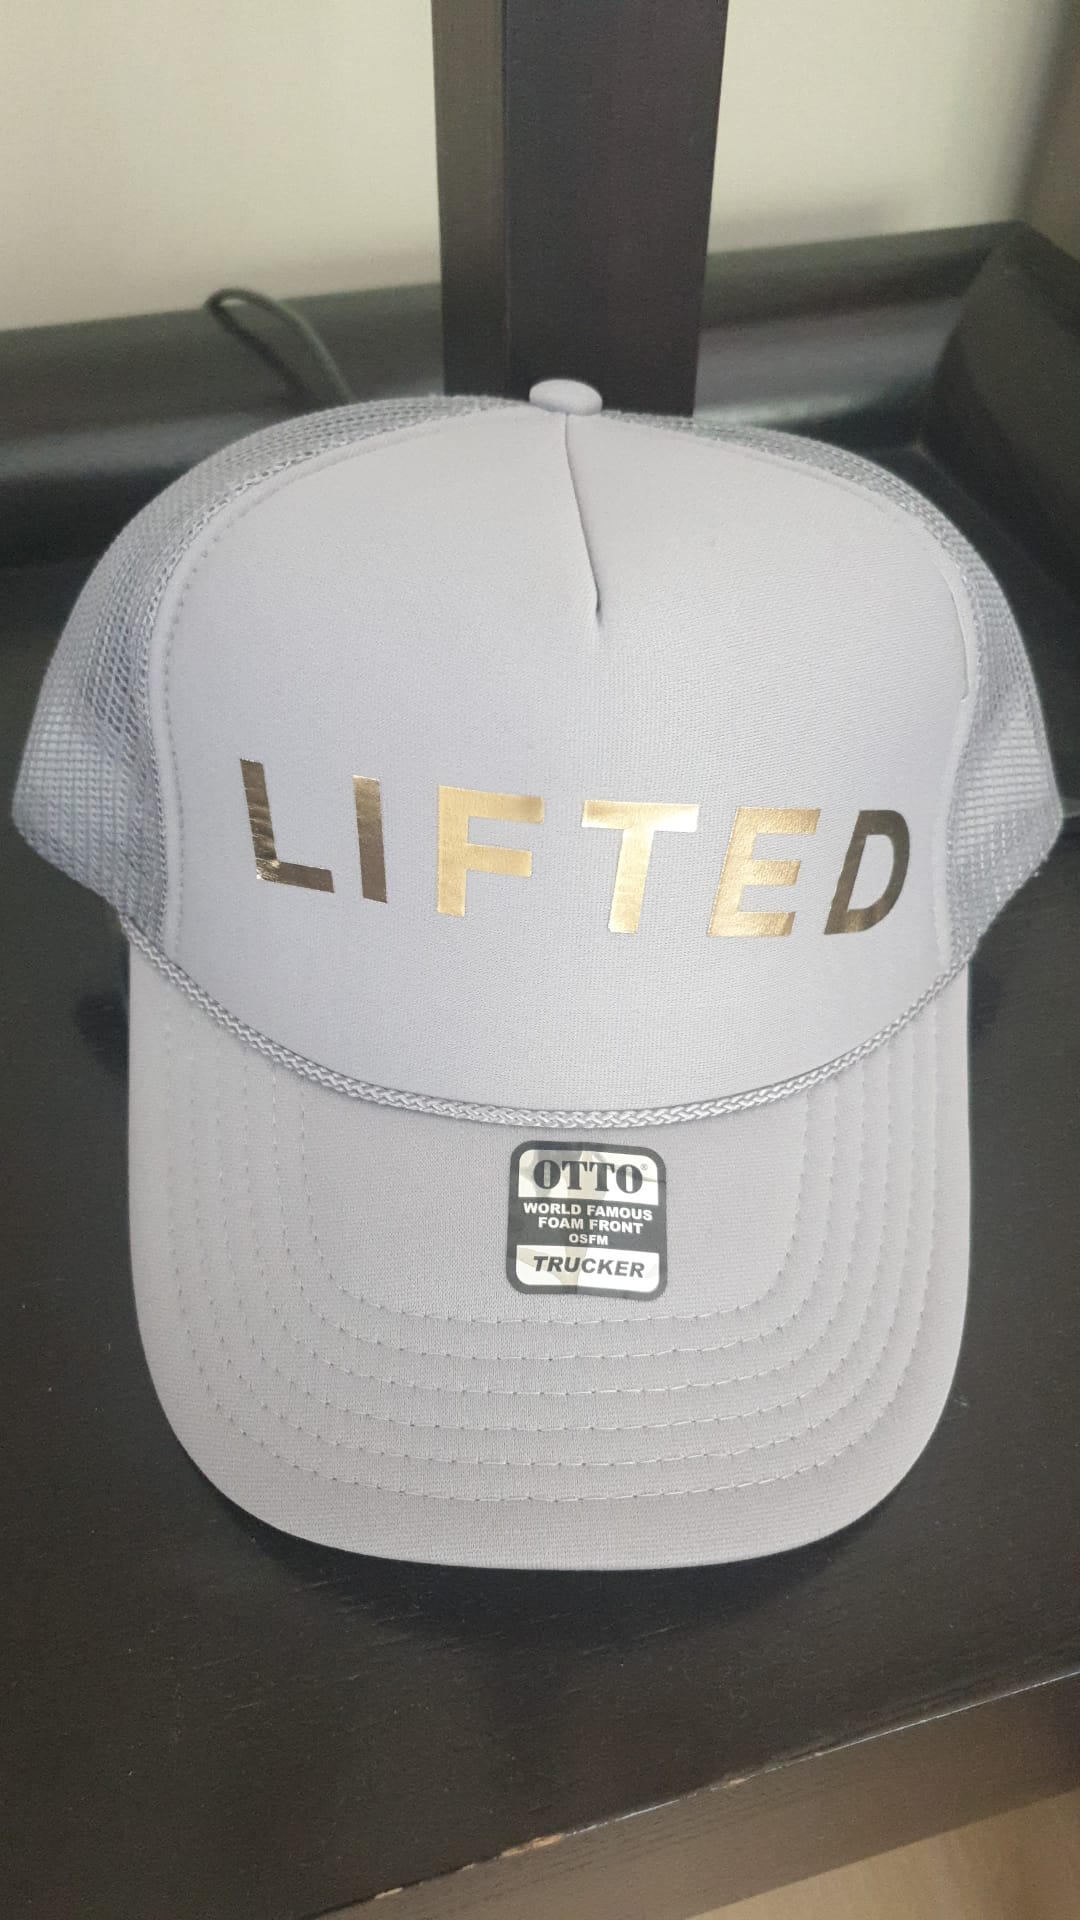 A white cap with Lifted written on it